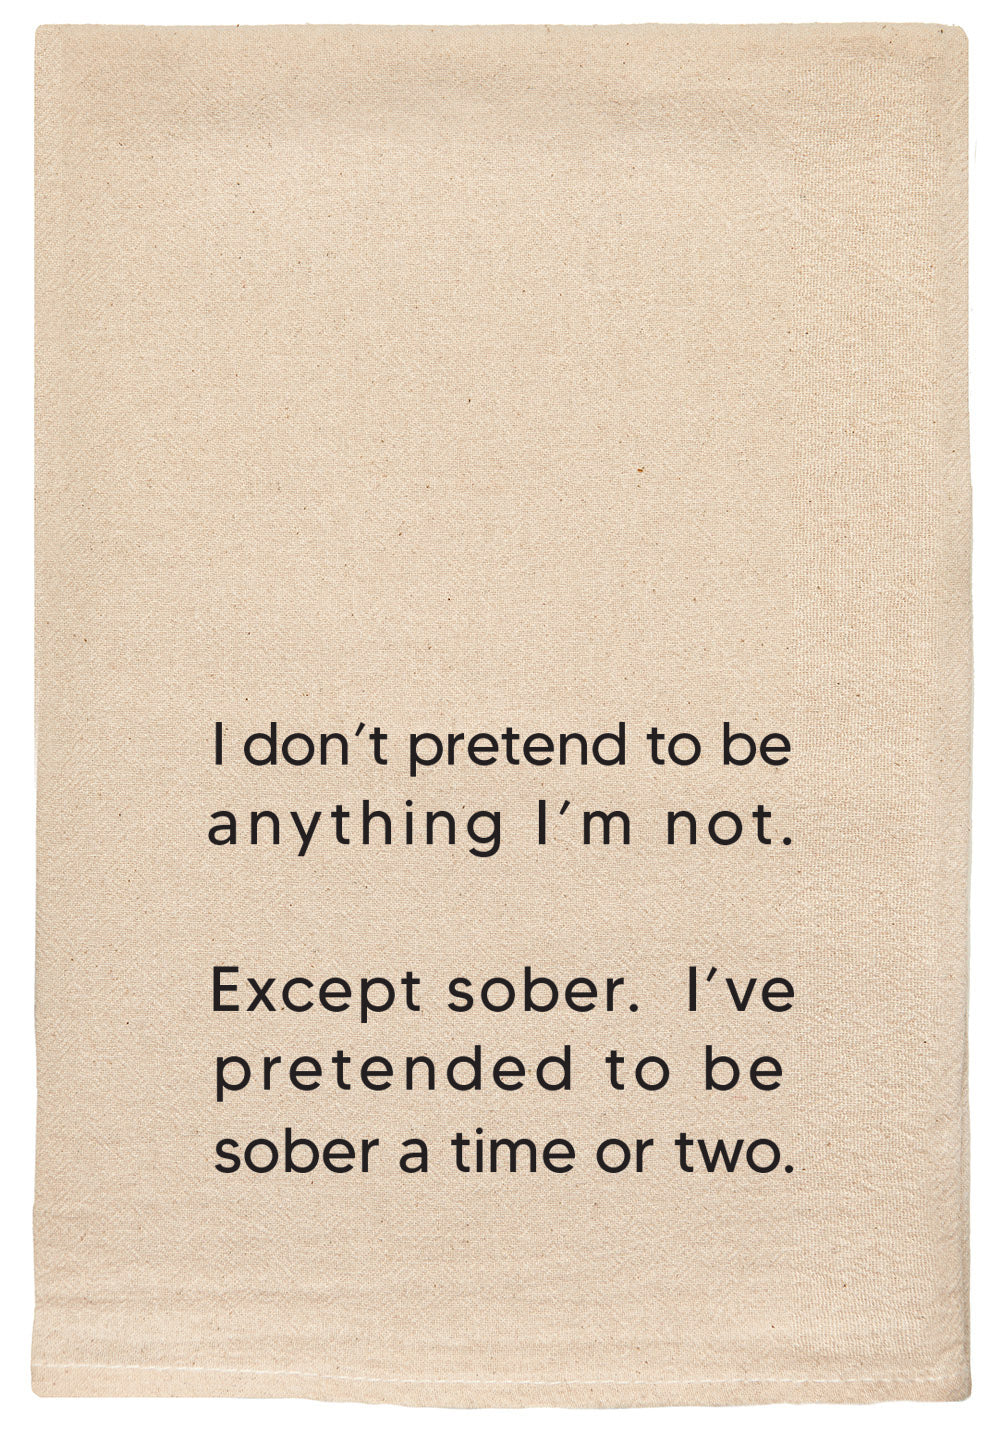 I don't pretend to be anything I'm not. Except sober. I've pretended to be sober a time or two.